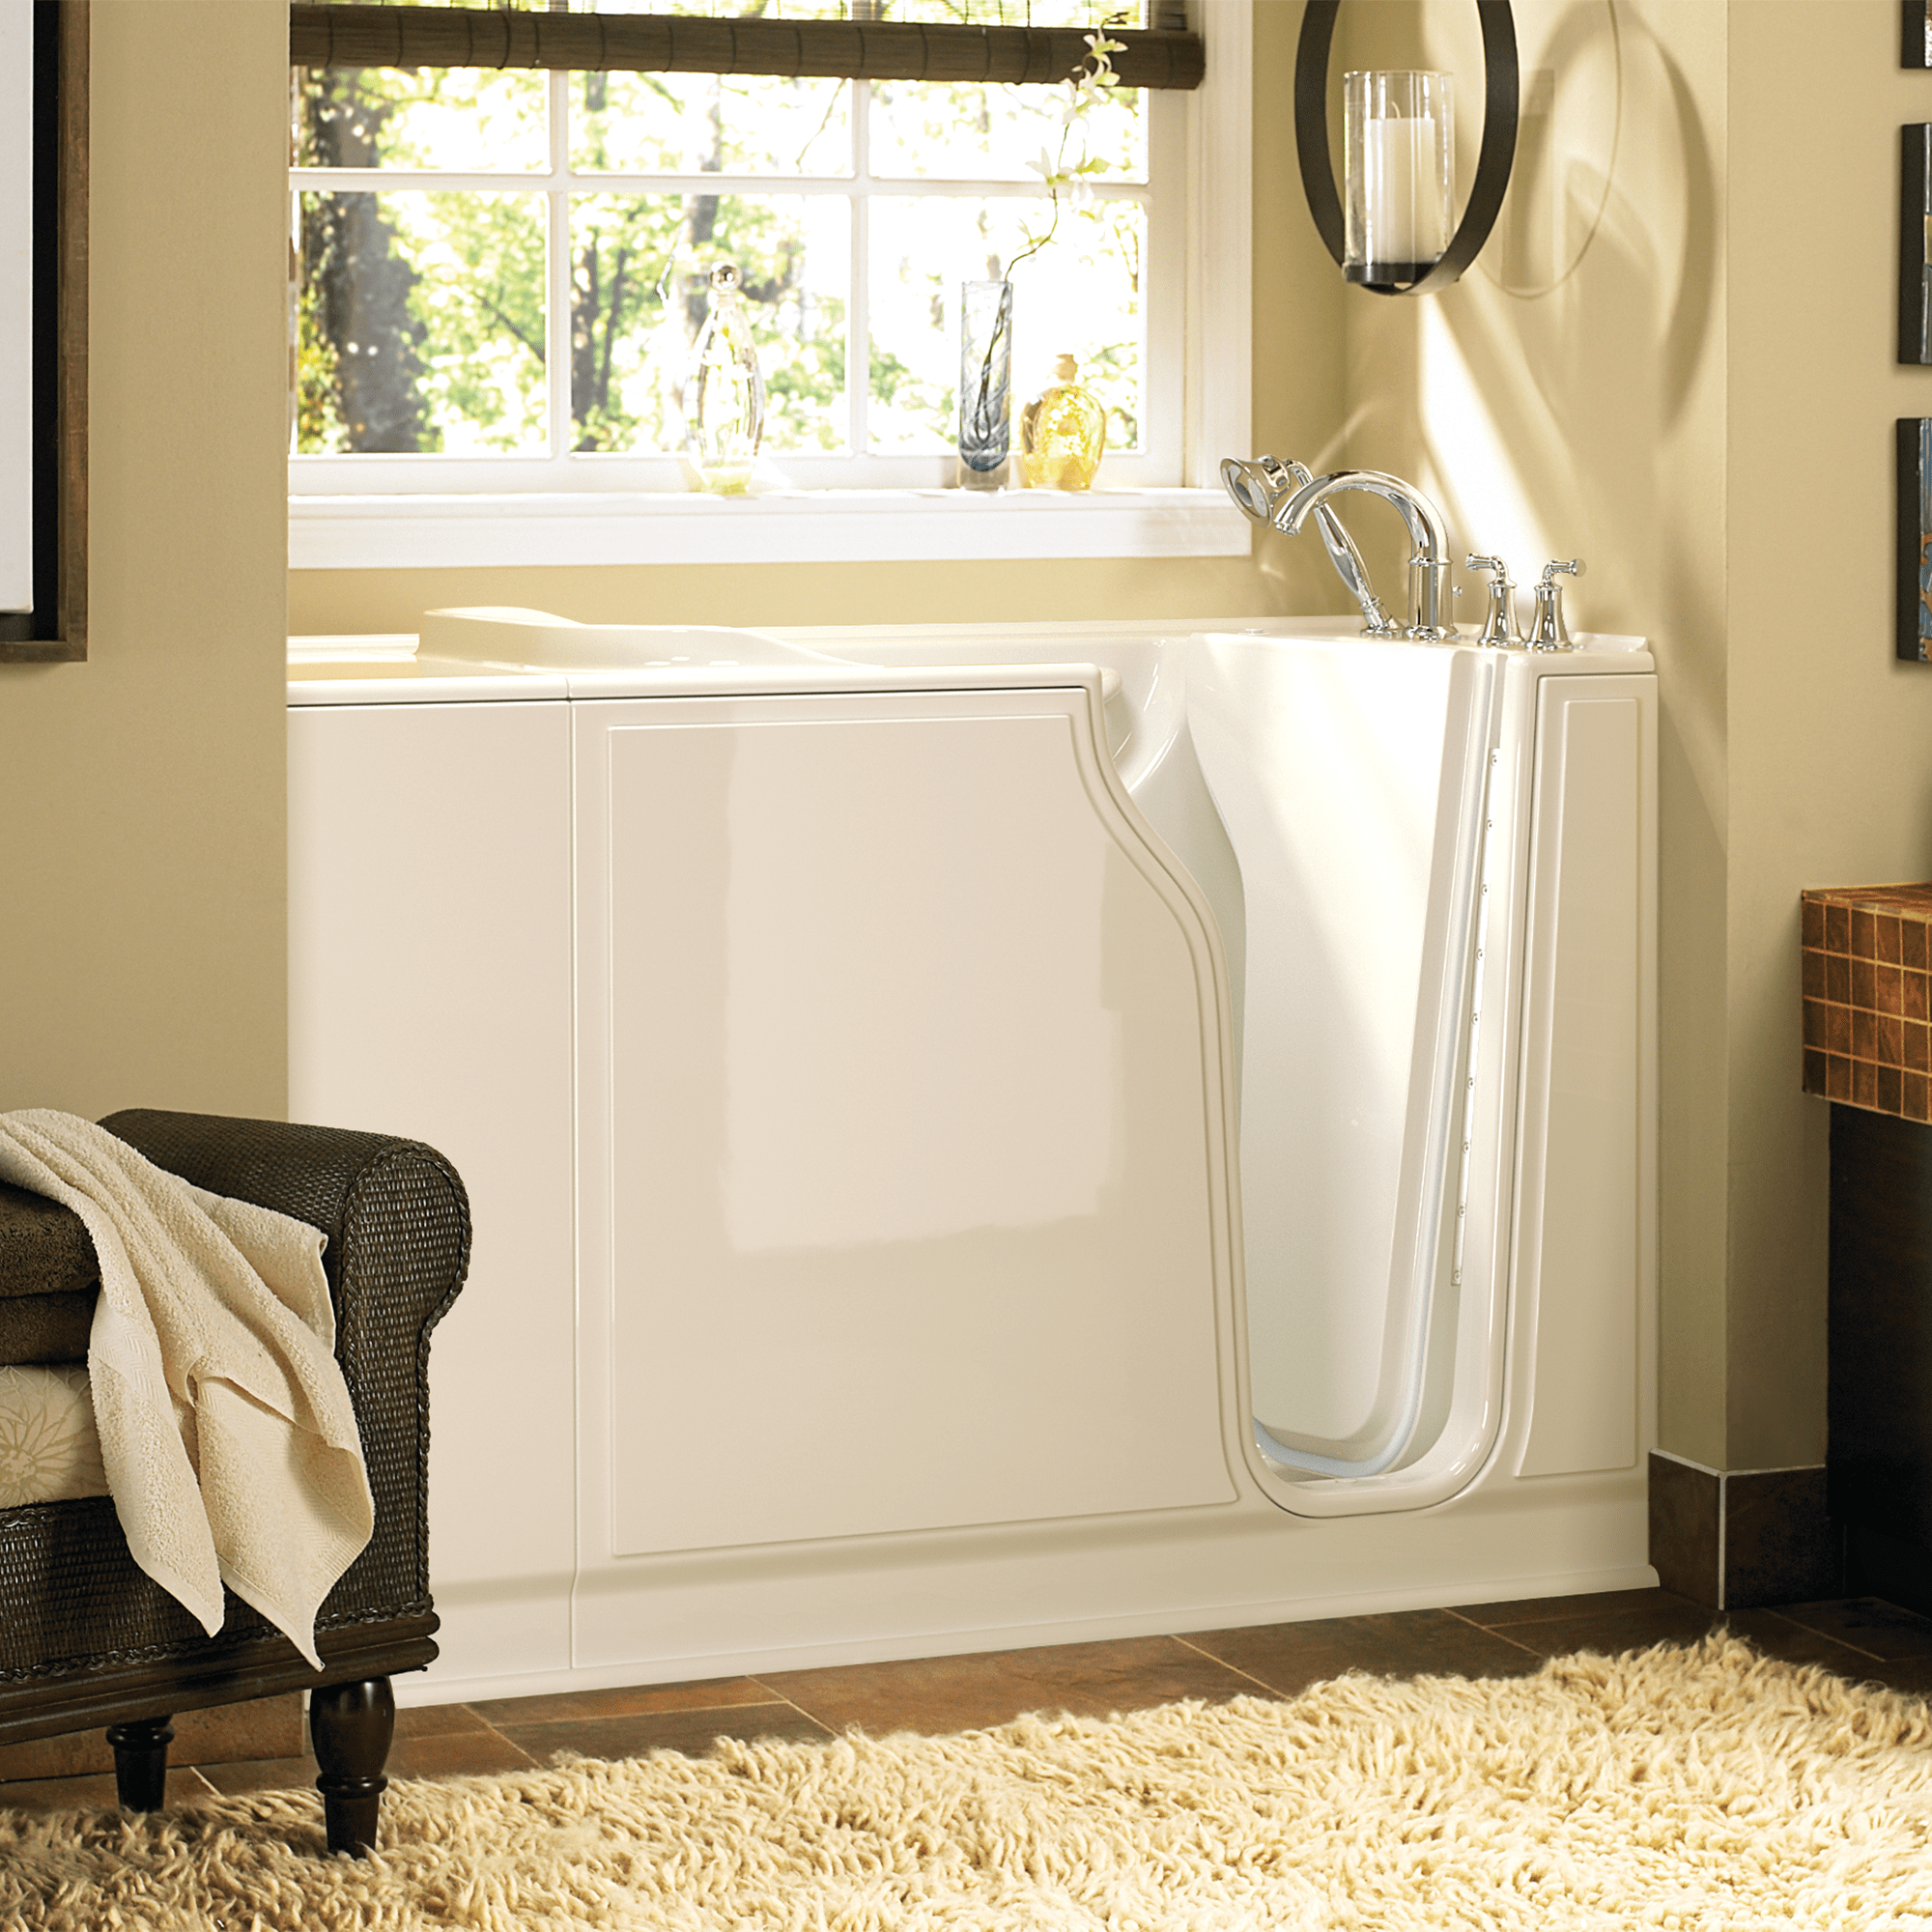 Gelcoat Value Series 30 x 52 -Inch Walk-in Tub With Whirlpool System - Right-Hand Drain With Faucet